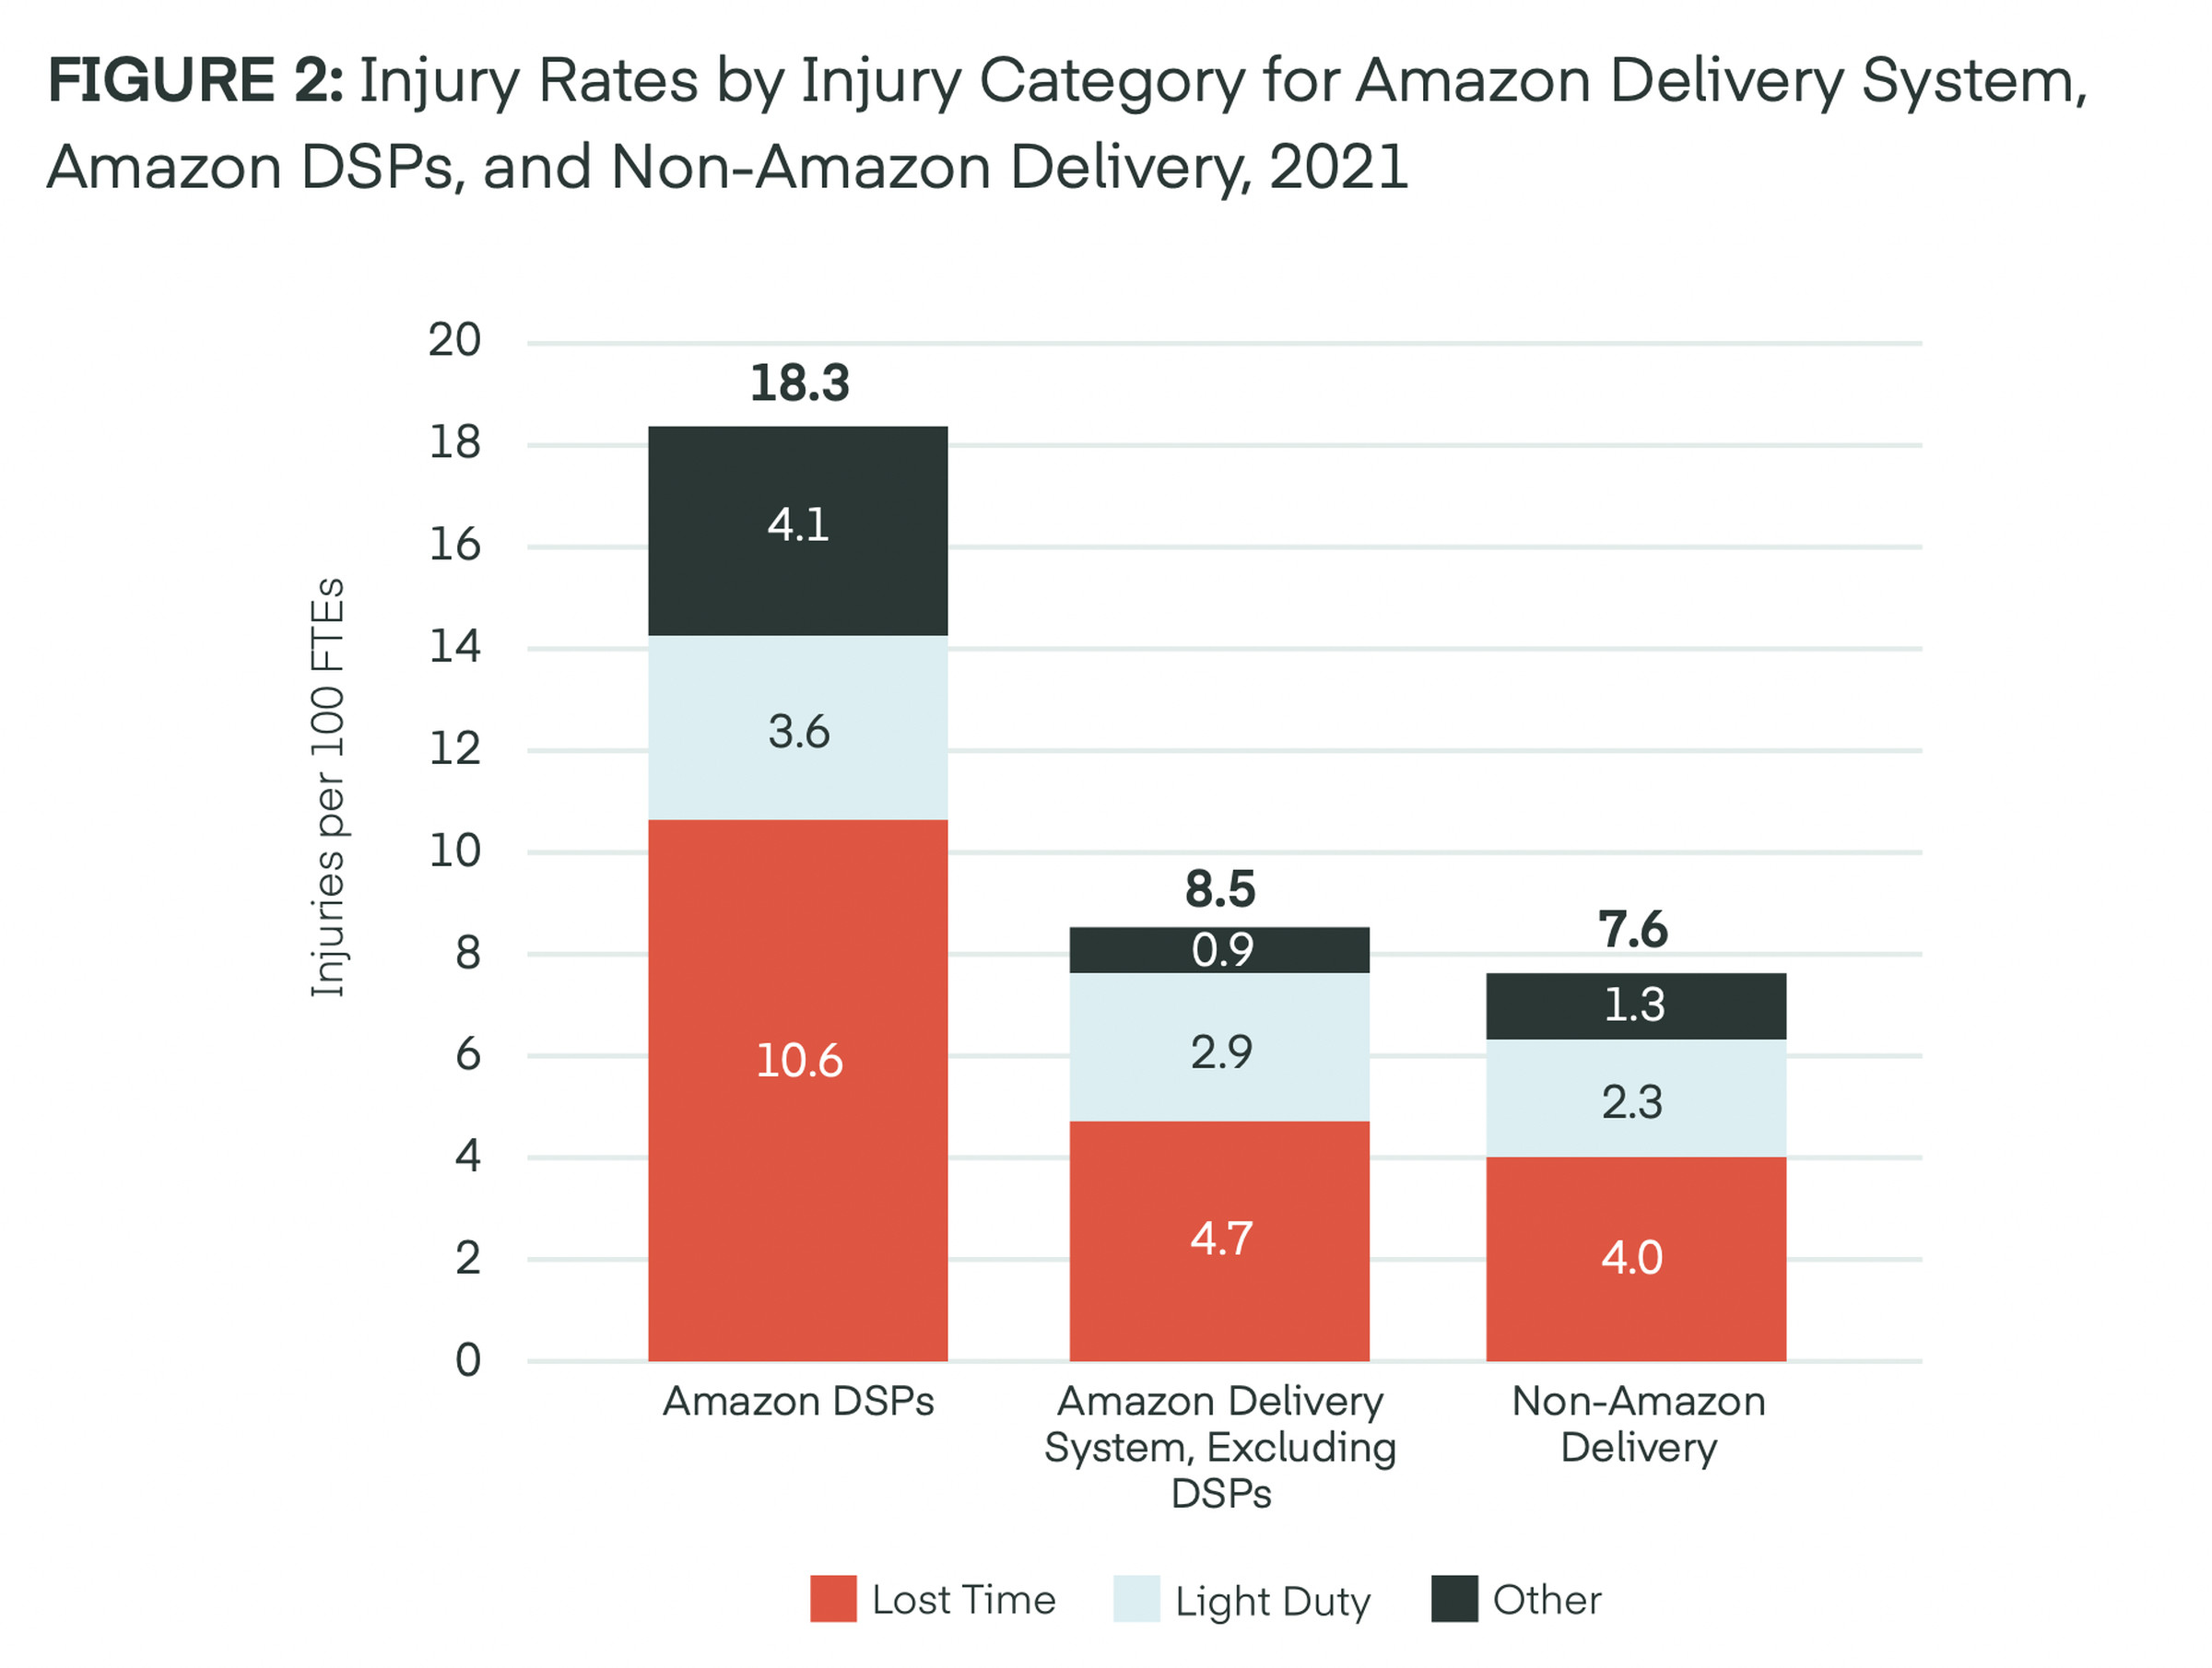 A graph showing DSP injury rates versus the rest of Amazon’s delivery system and the non-Amazon delivery industry.